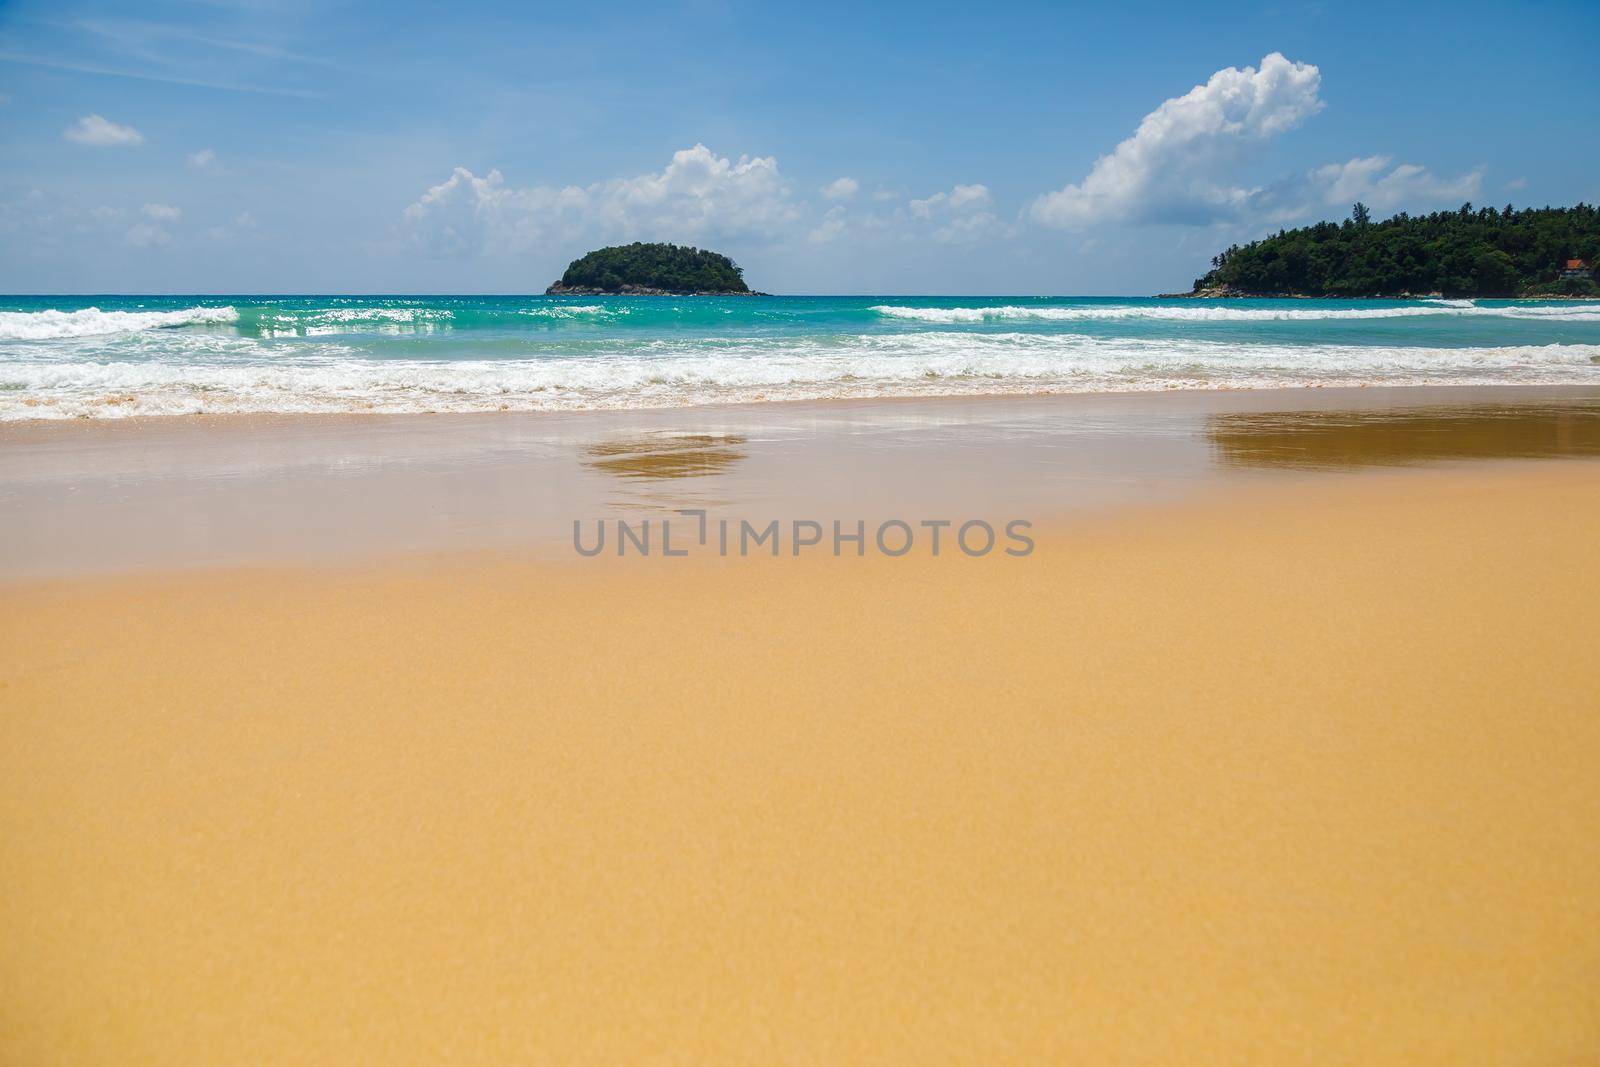 Beautiful sea Sunny landscape on the beach. Light waves of blue color spread all over the beach smoothly smoothing the Golden sand.